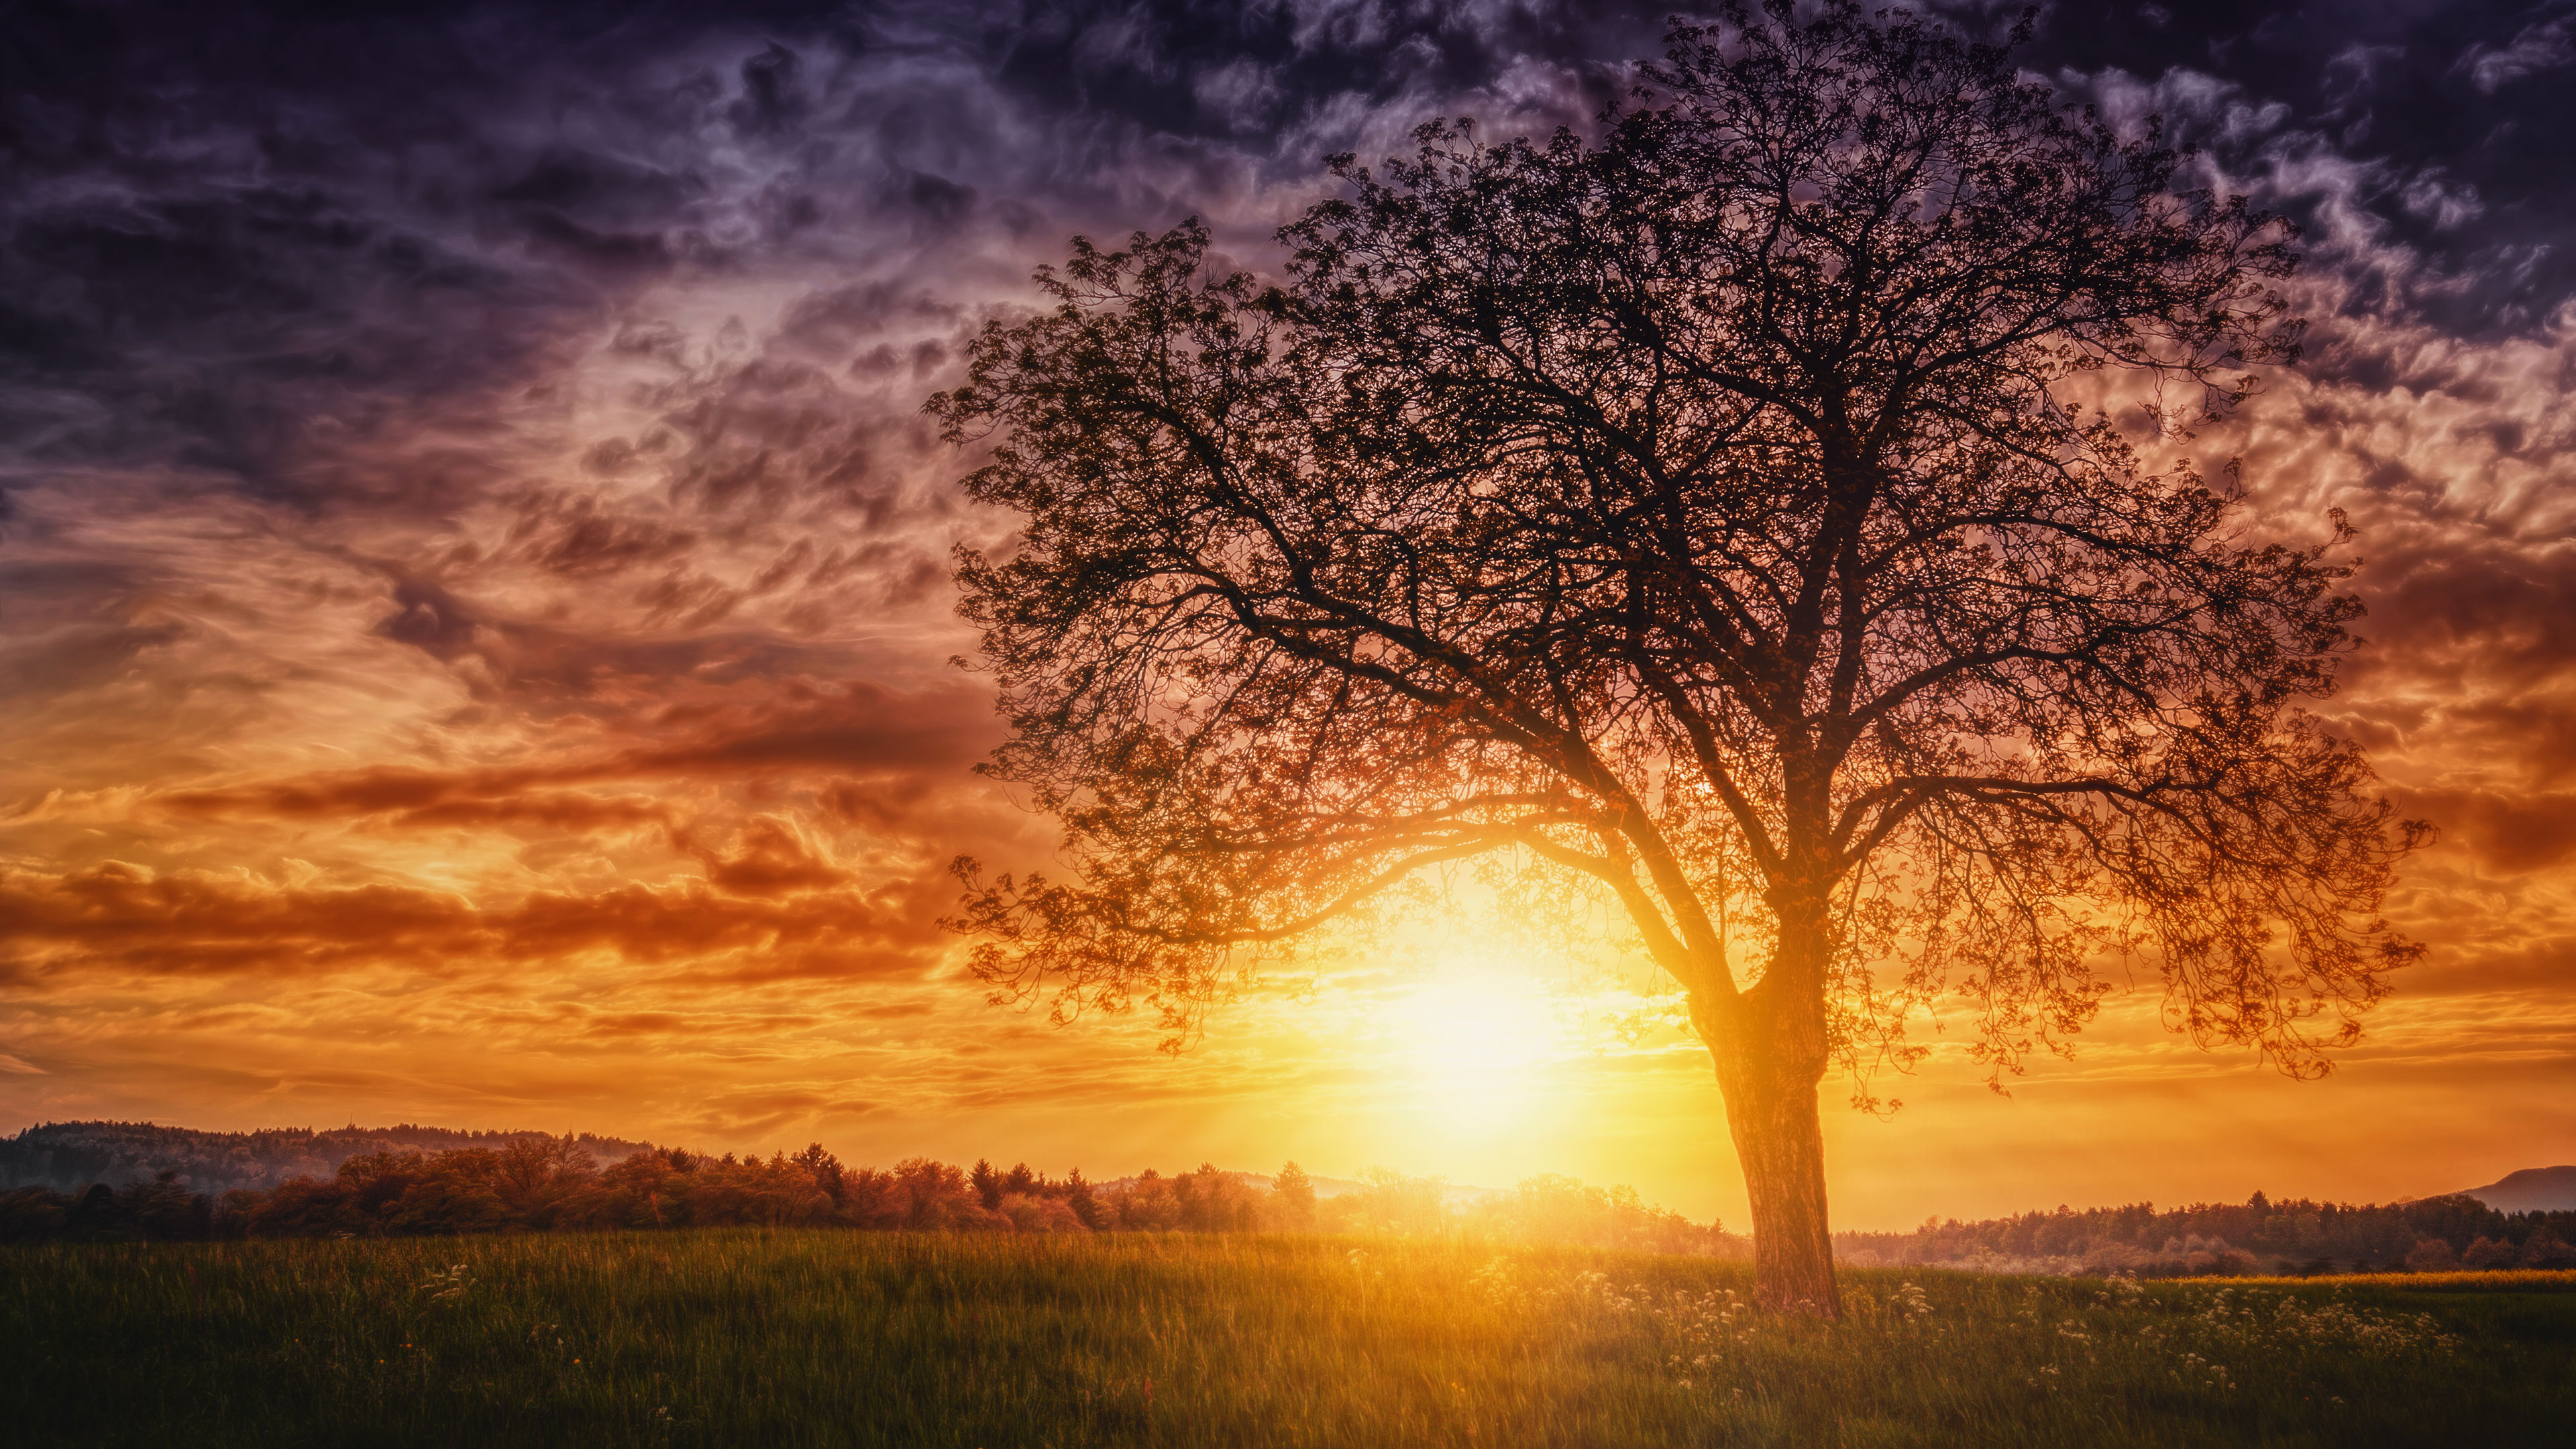 Wallpapers Of Sunsets Behind Trees